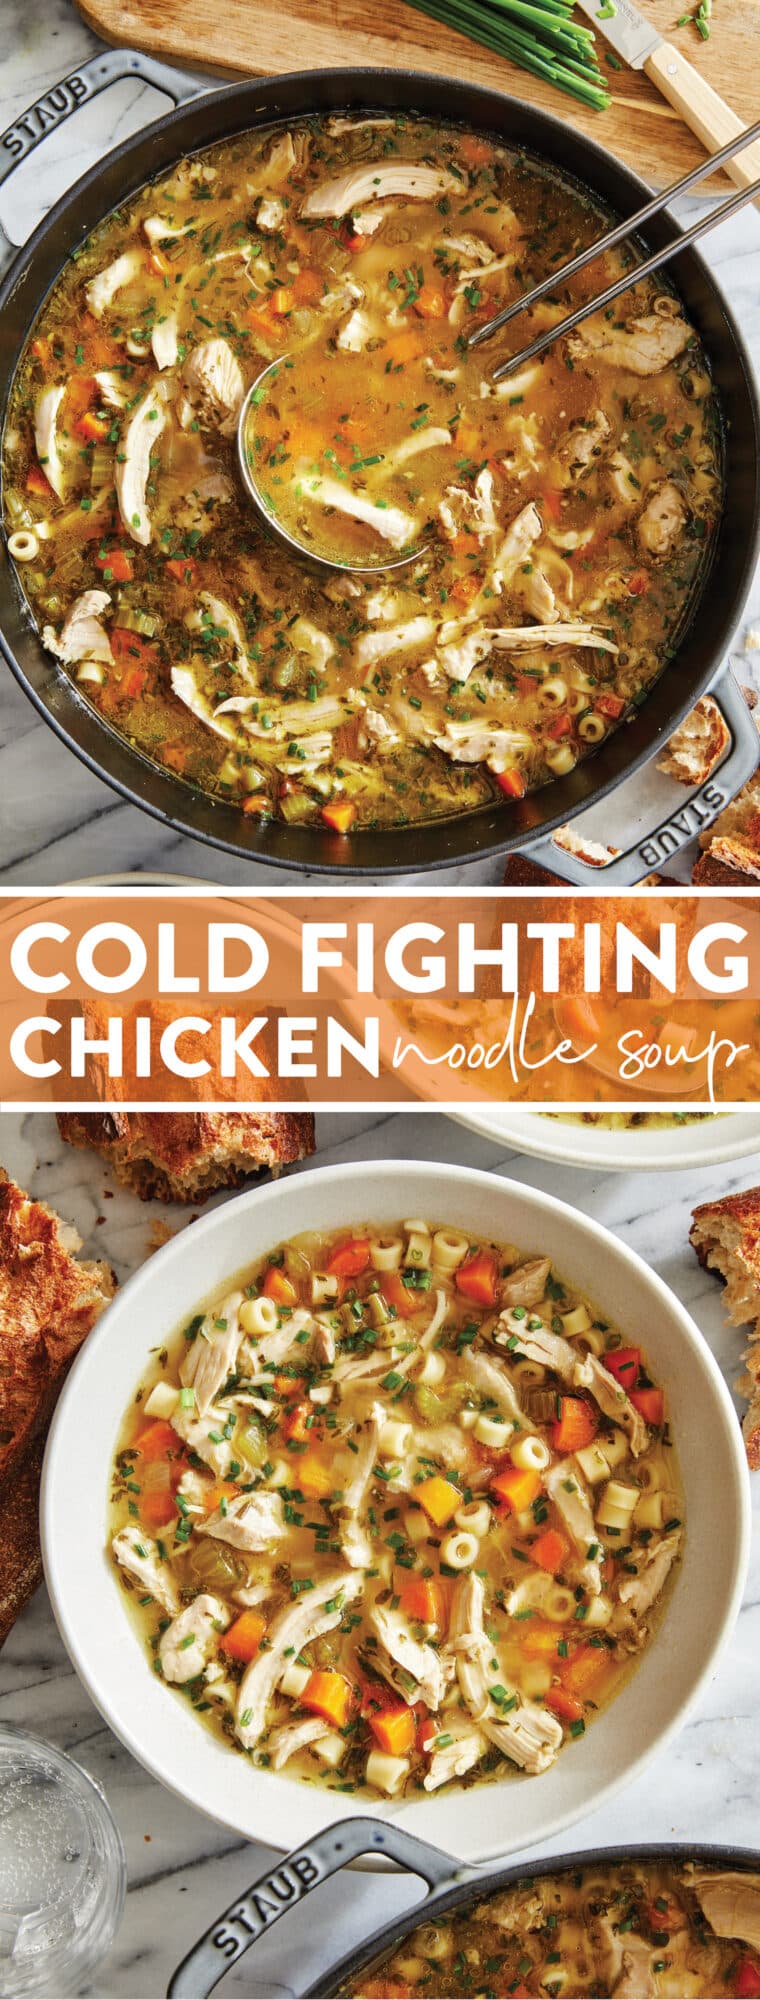 https://s23209.pcdn.co/wp-content/uploads/2018/09/Cold-Fighting-Chicken-Noodle-Soup-1-760x2000.jpg